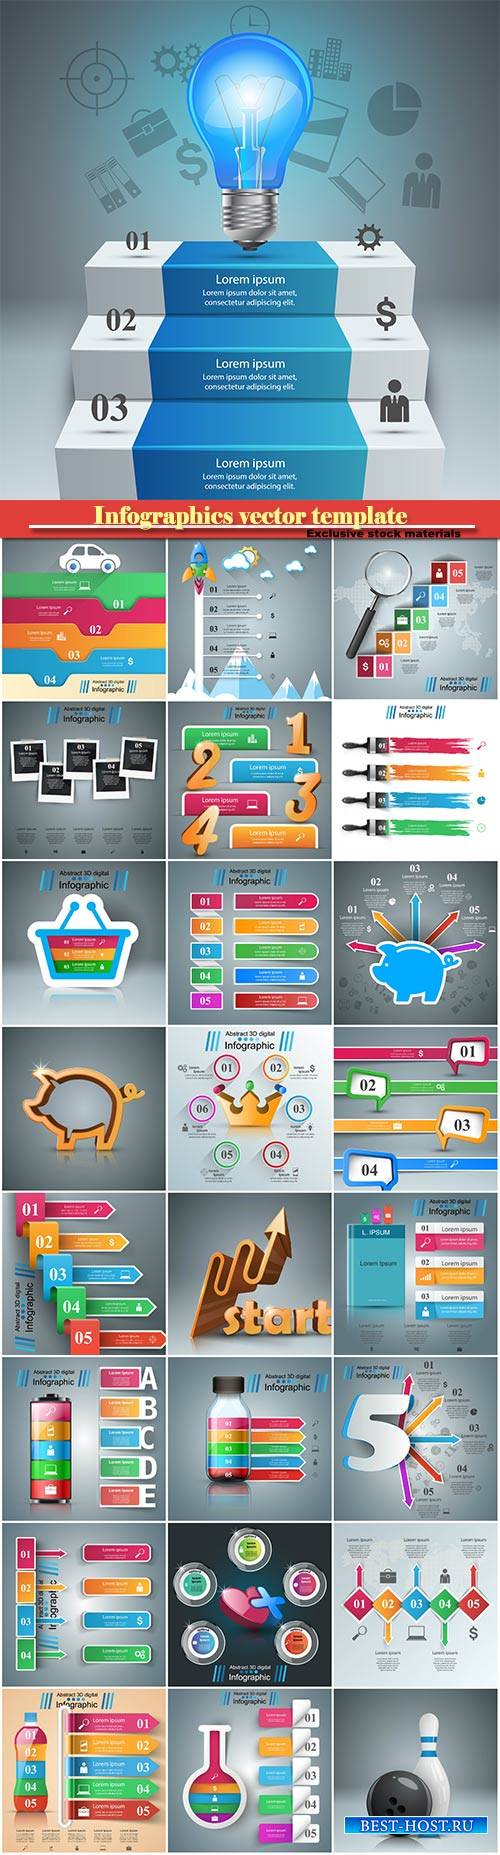 Infographics vector template for business presentations or information banner # 14